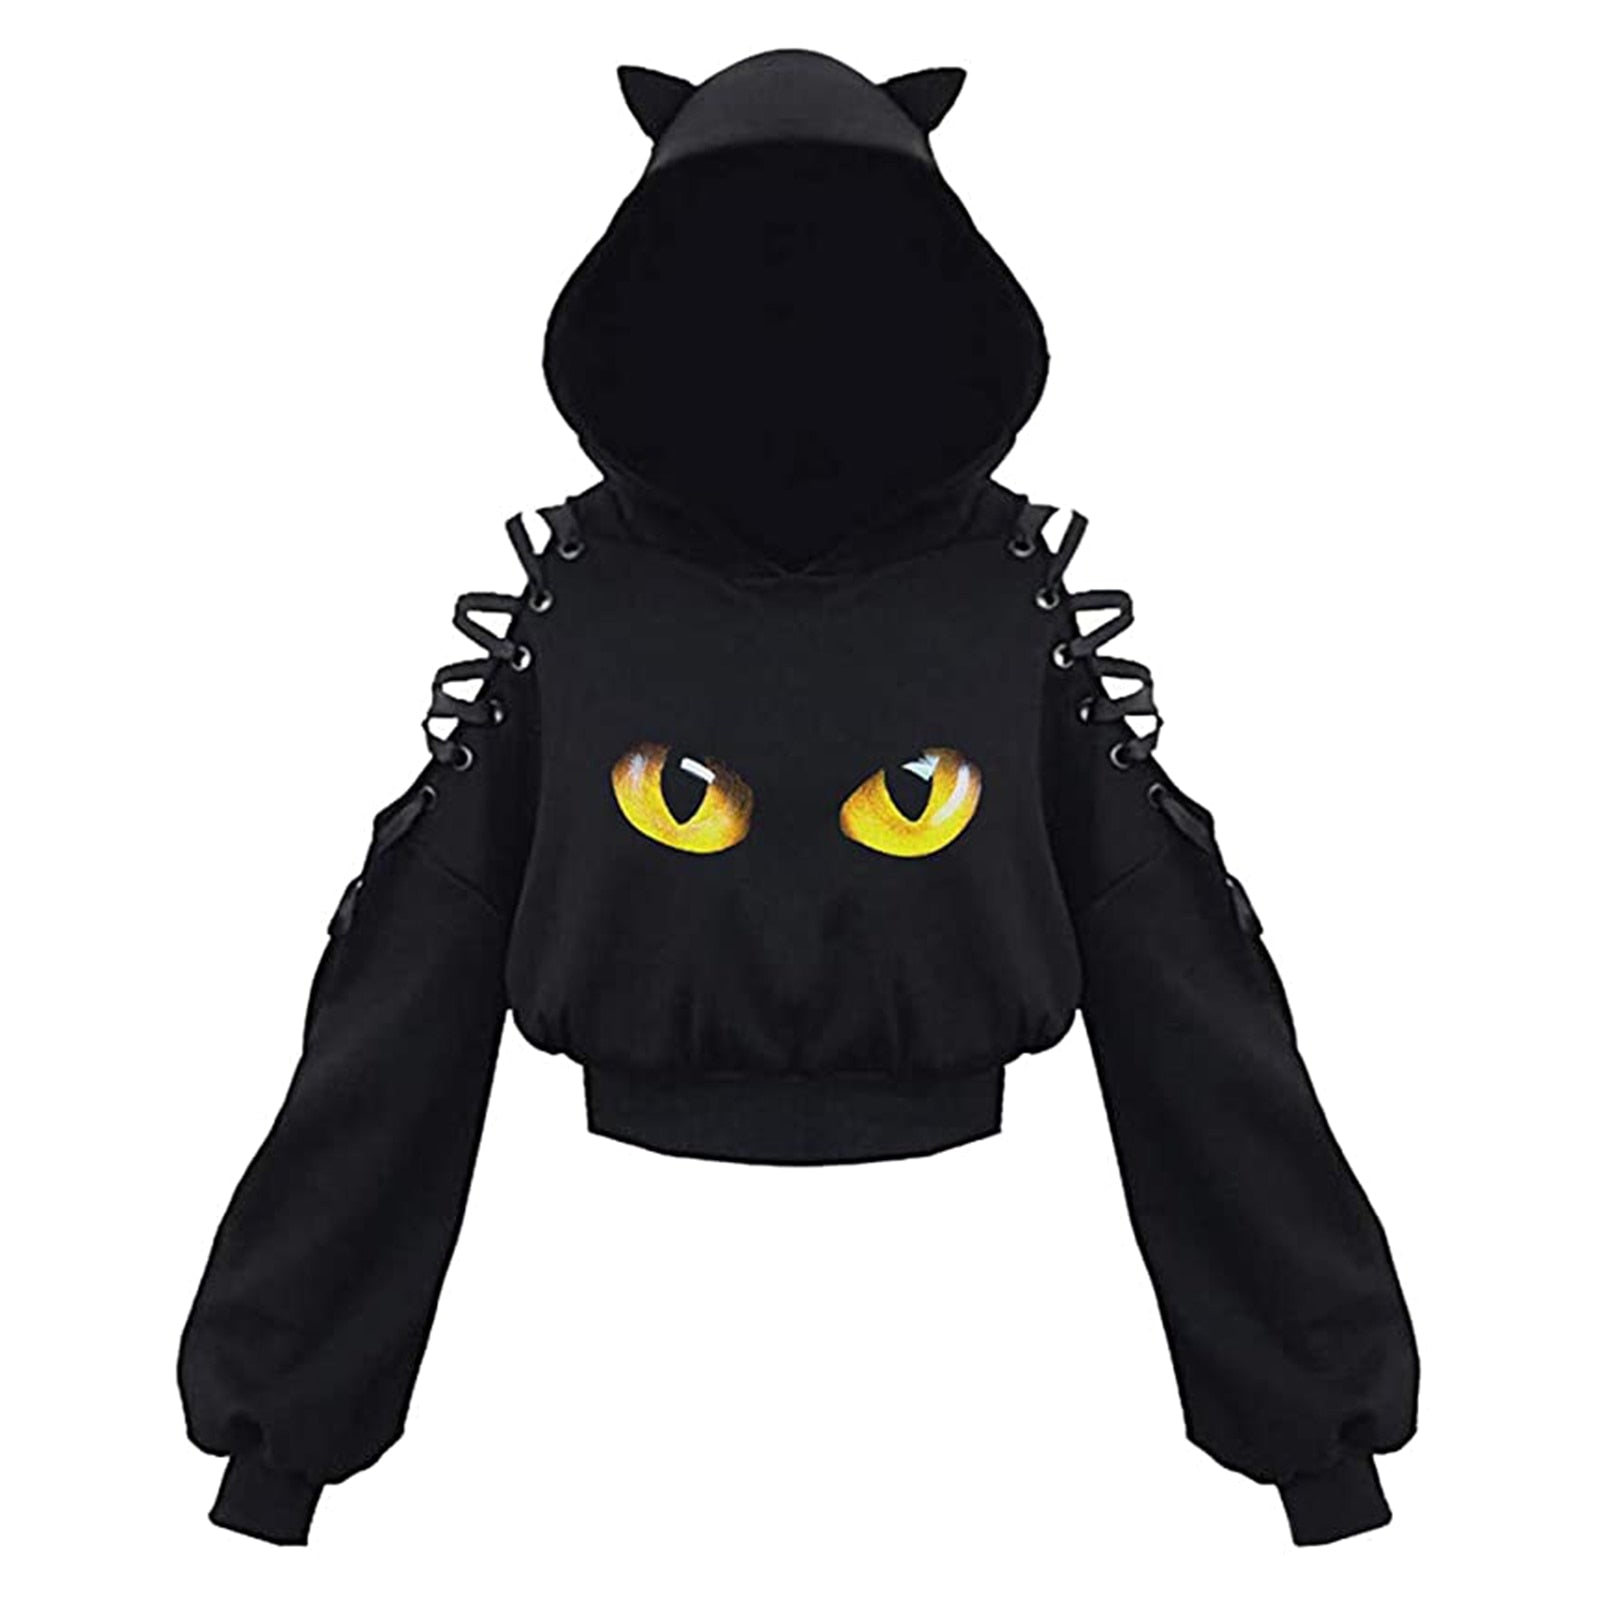 black cat hoodie with yellow eyes in crop top design for cat mom